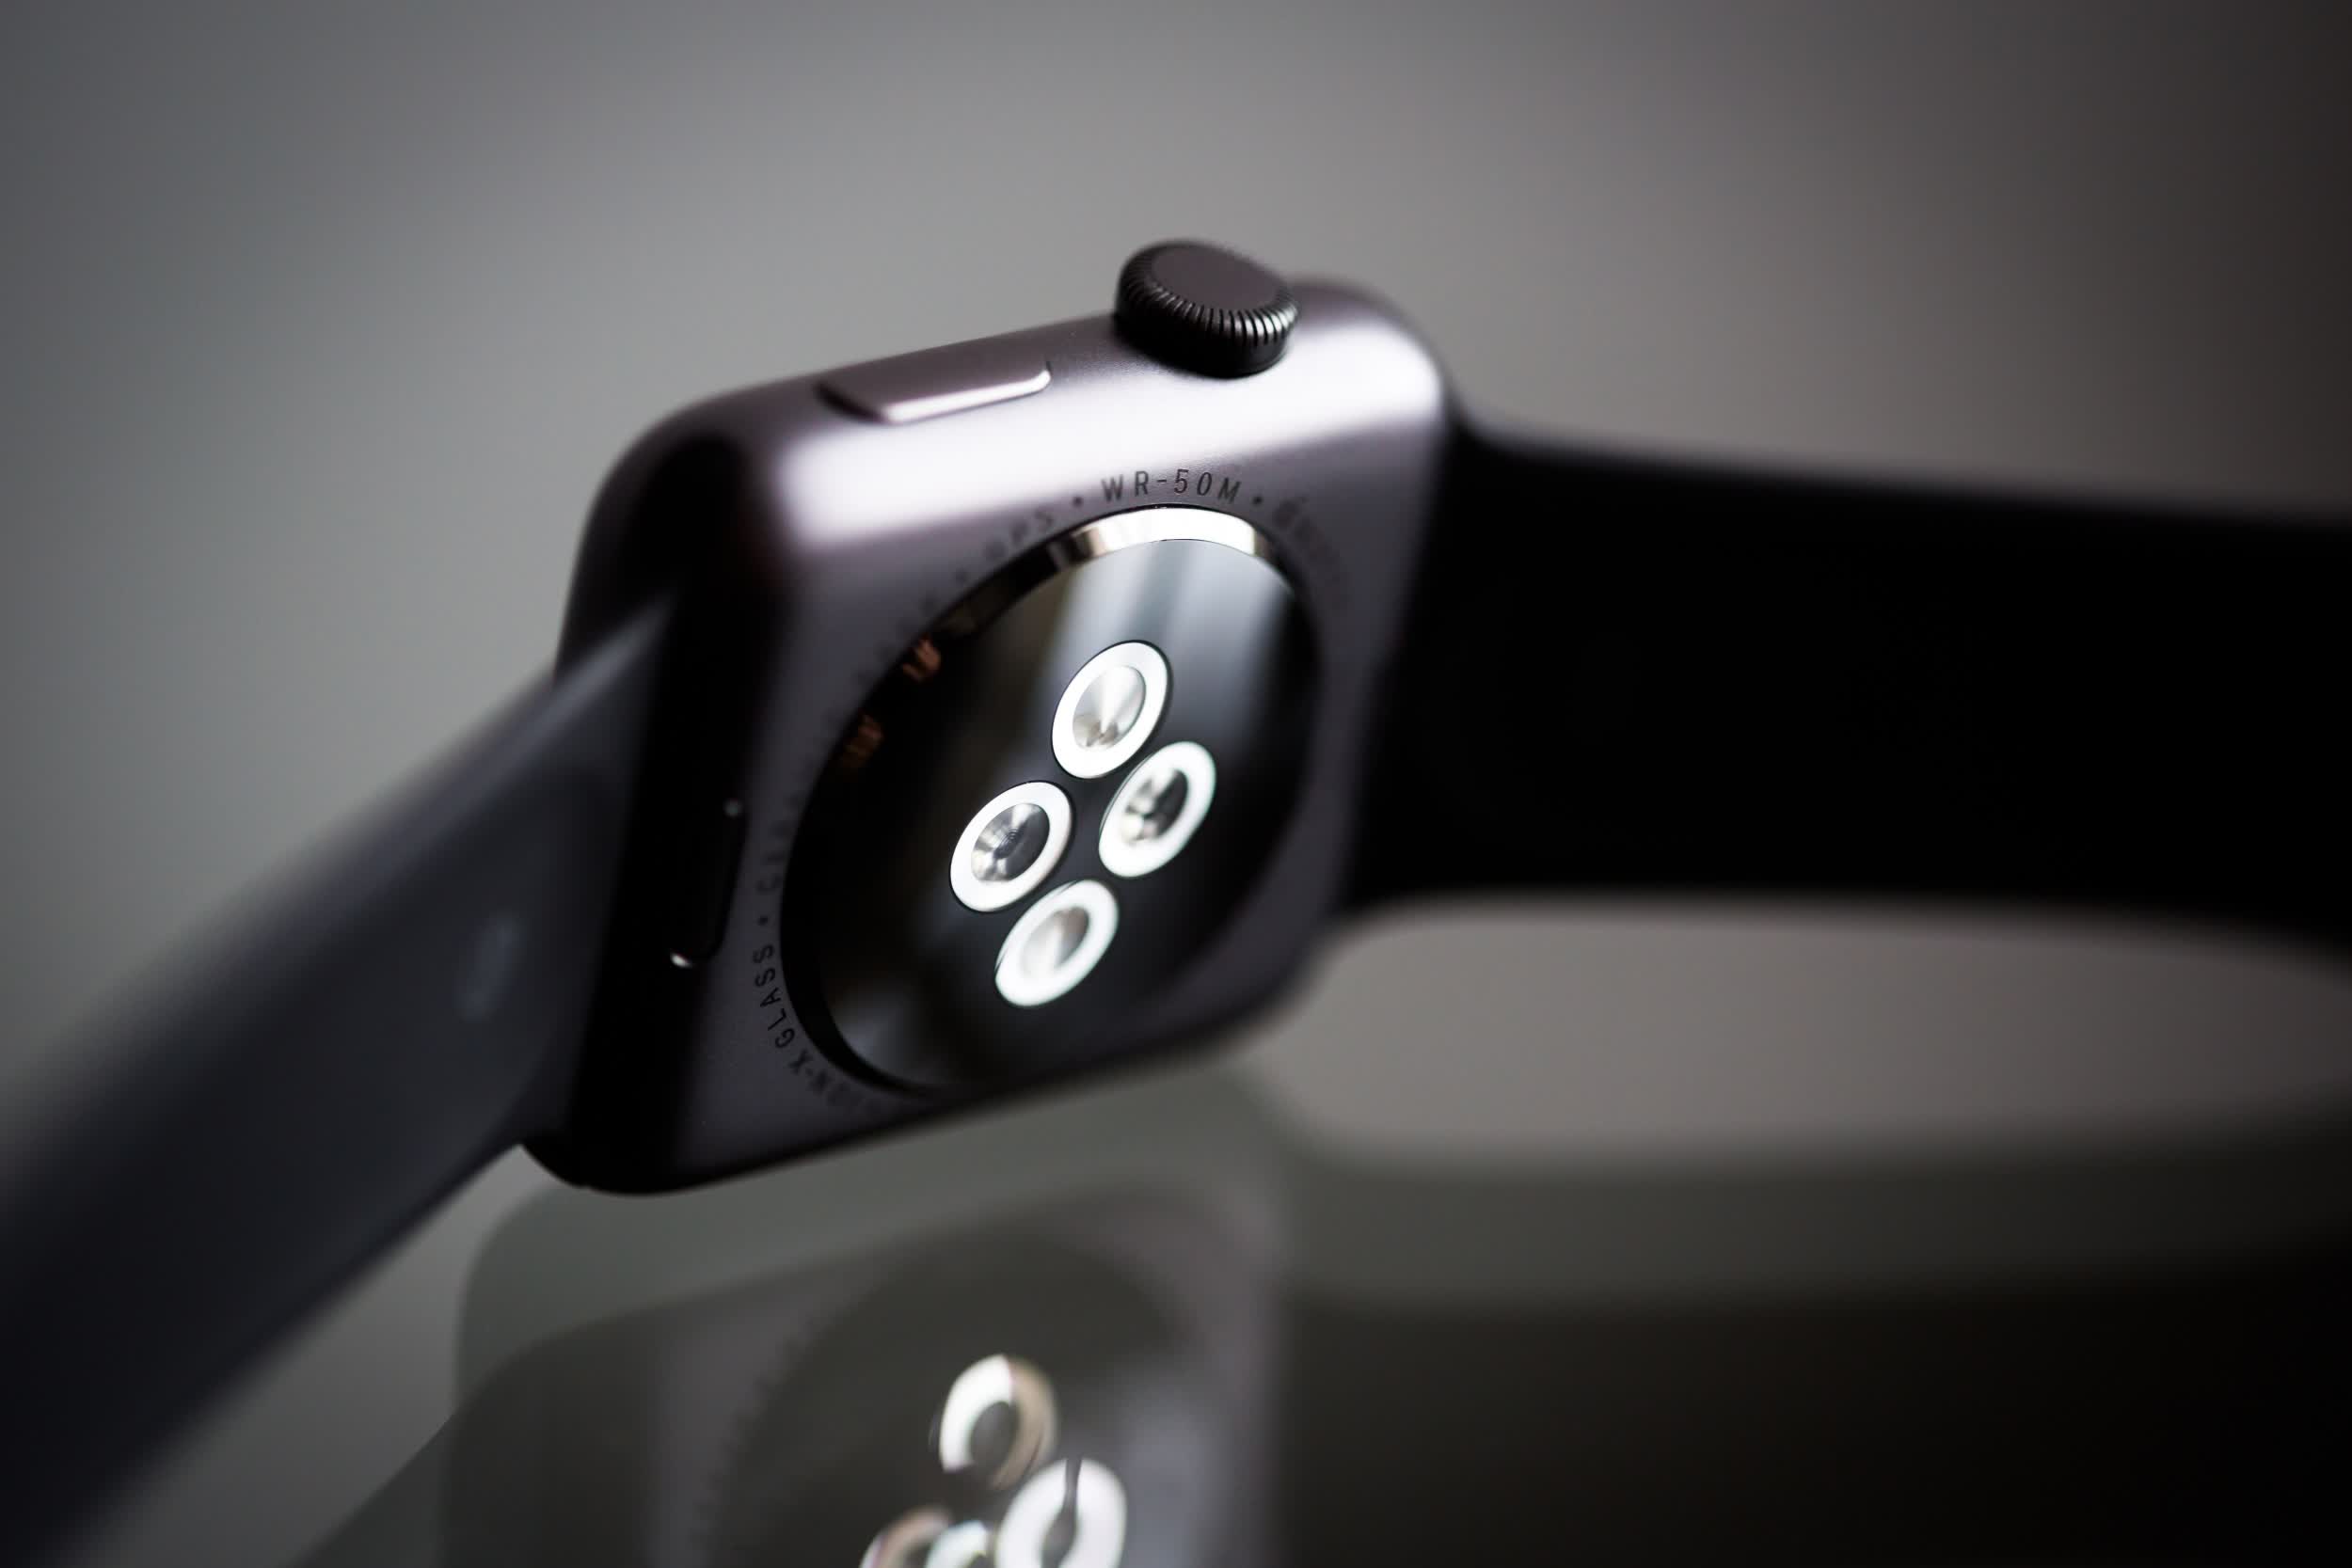 Patent applications imagine the Apple Watch without the digital crown